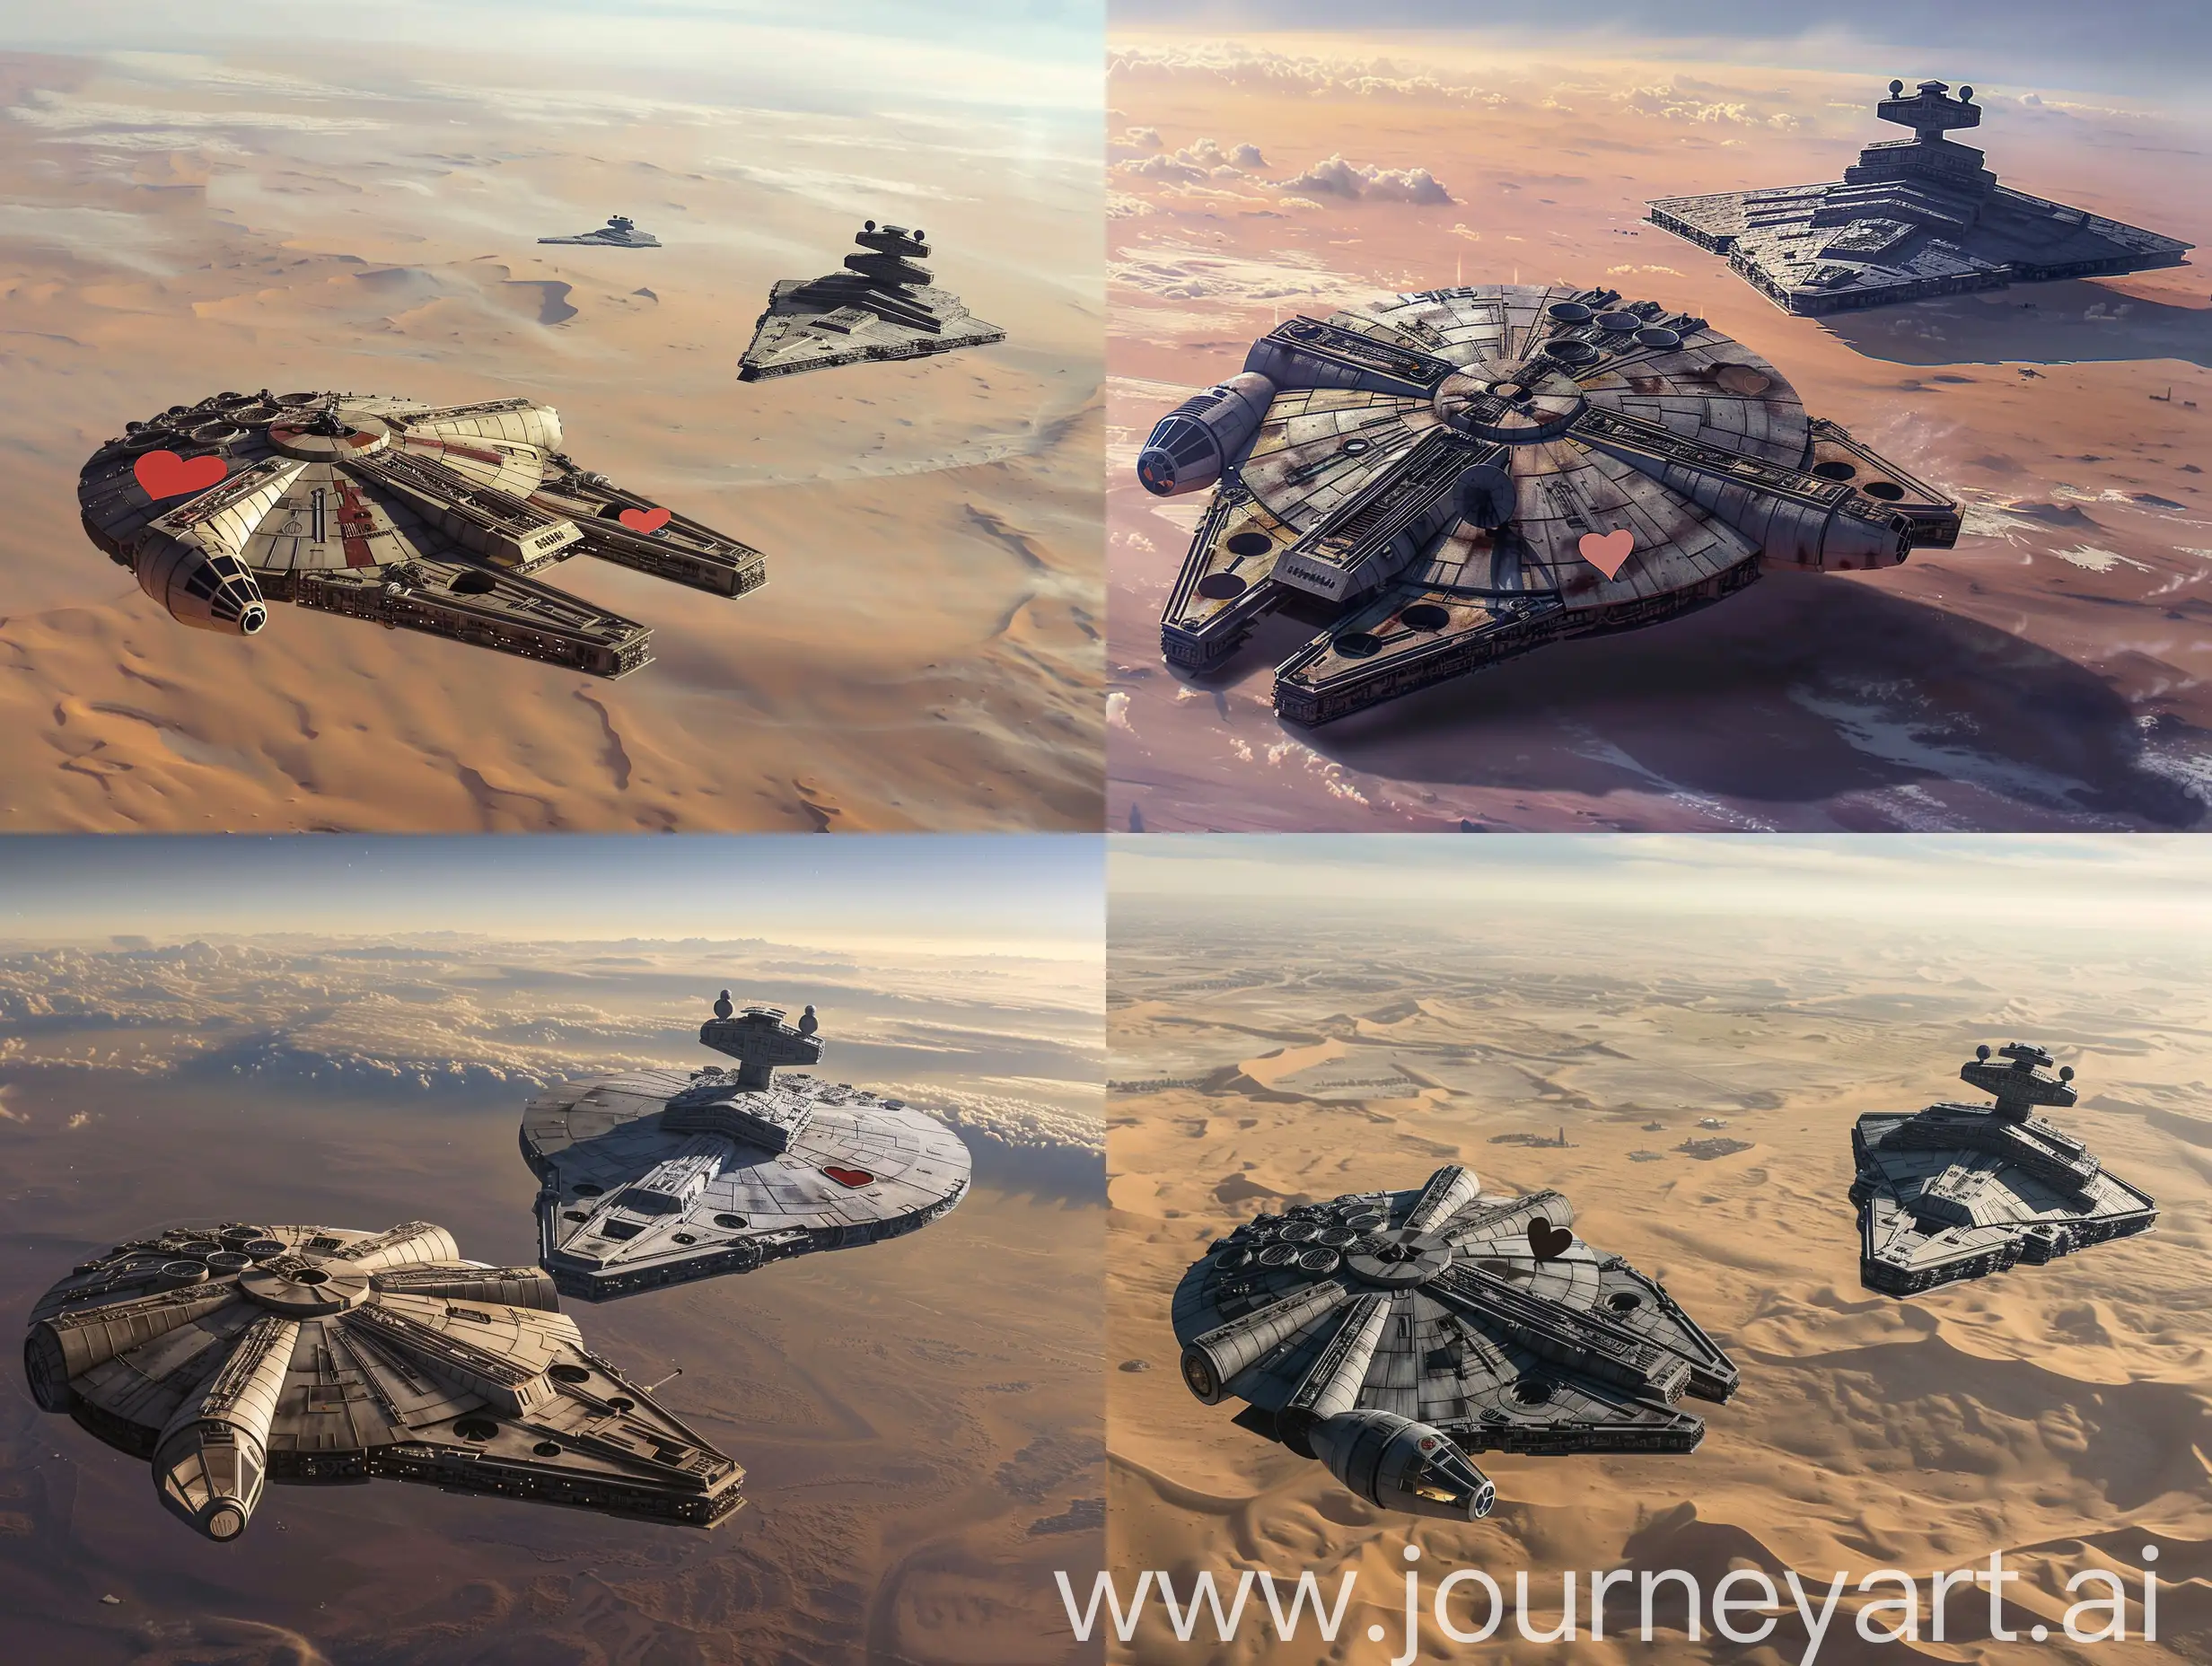 HeartShaped-Millennium-Falcon-and-Imperial-Destroyer-in-Low-Orbit-over-Tatooine